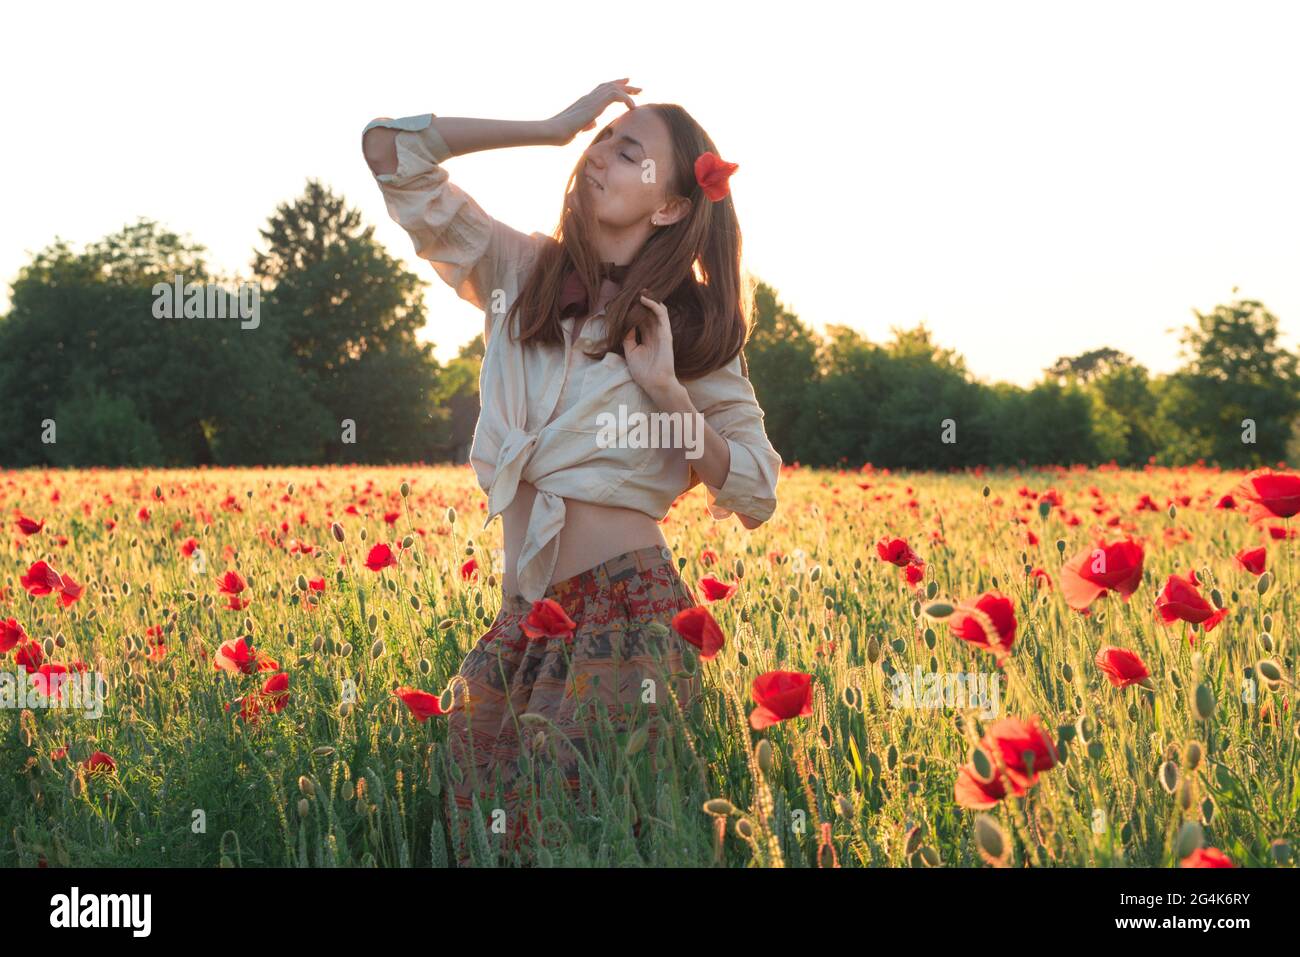 Young woman dancing on poppy field from back Stock Photo